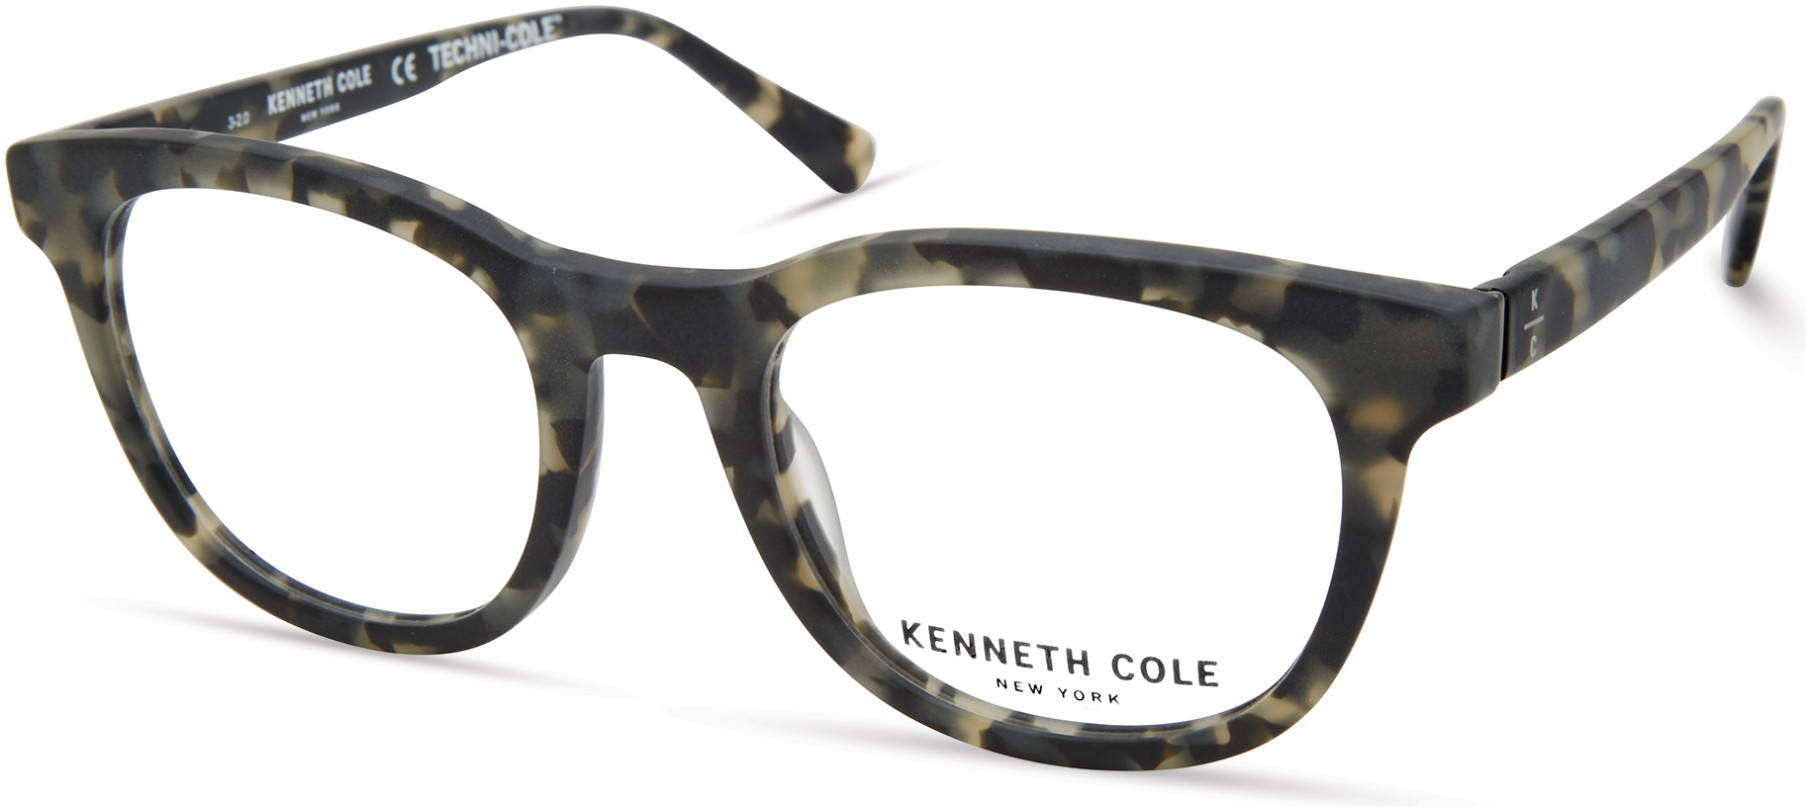 KENNETH COLE NY 0321 098